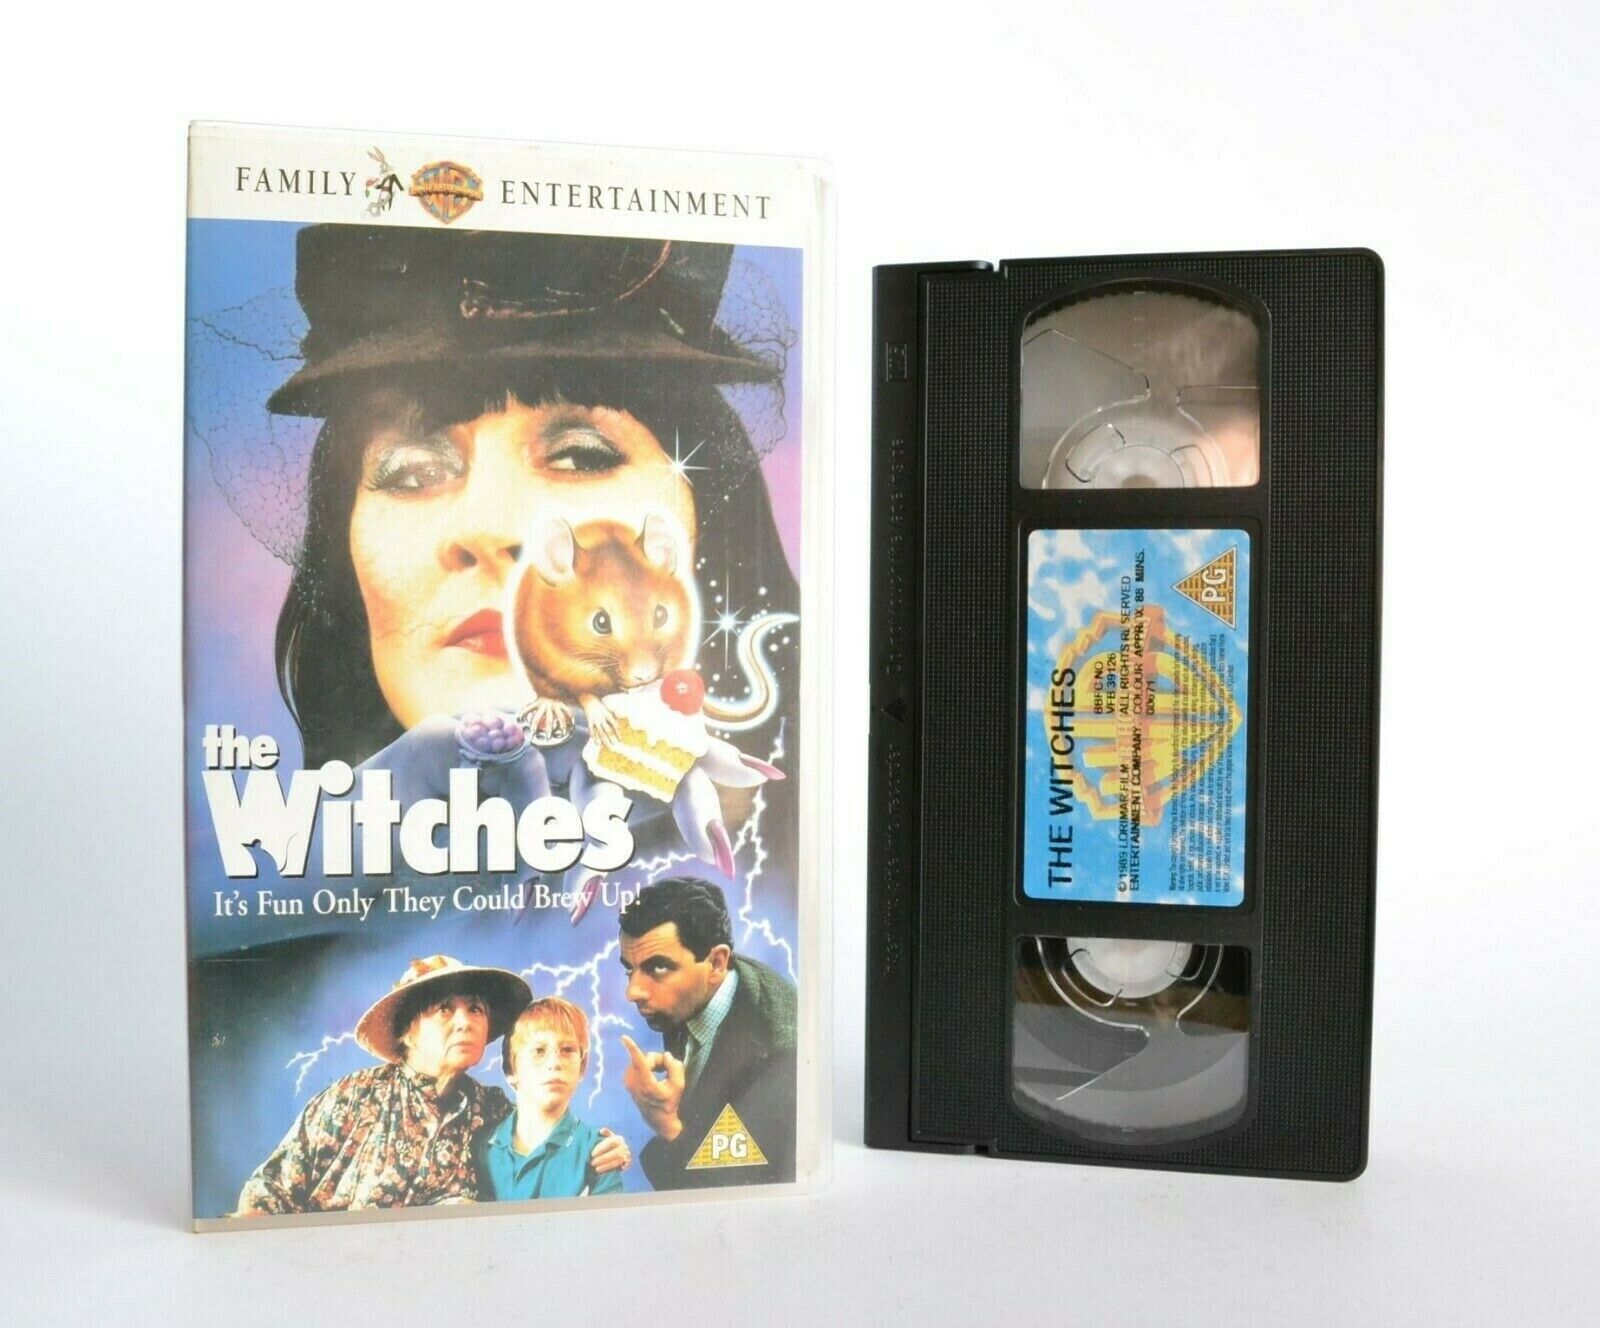 The Witches: Warner Home (1990) - Family Classic - A.Huston/R.Atkinson - VHS-